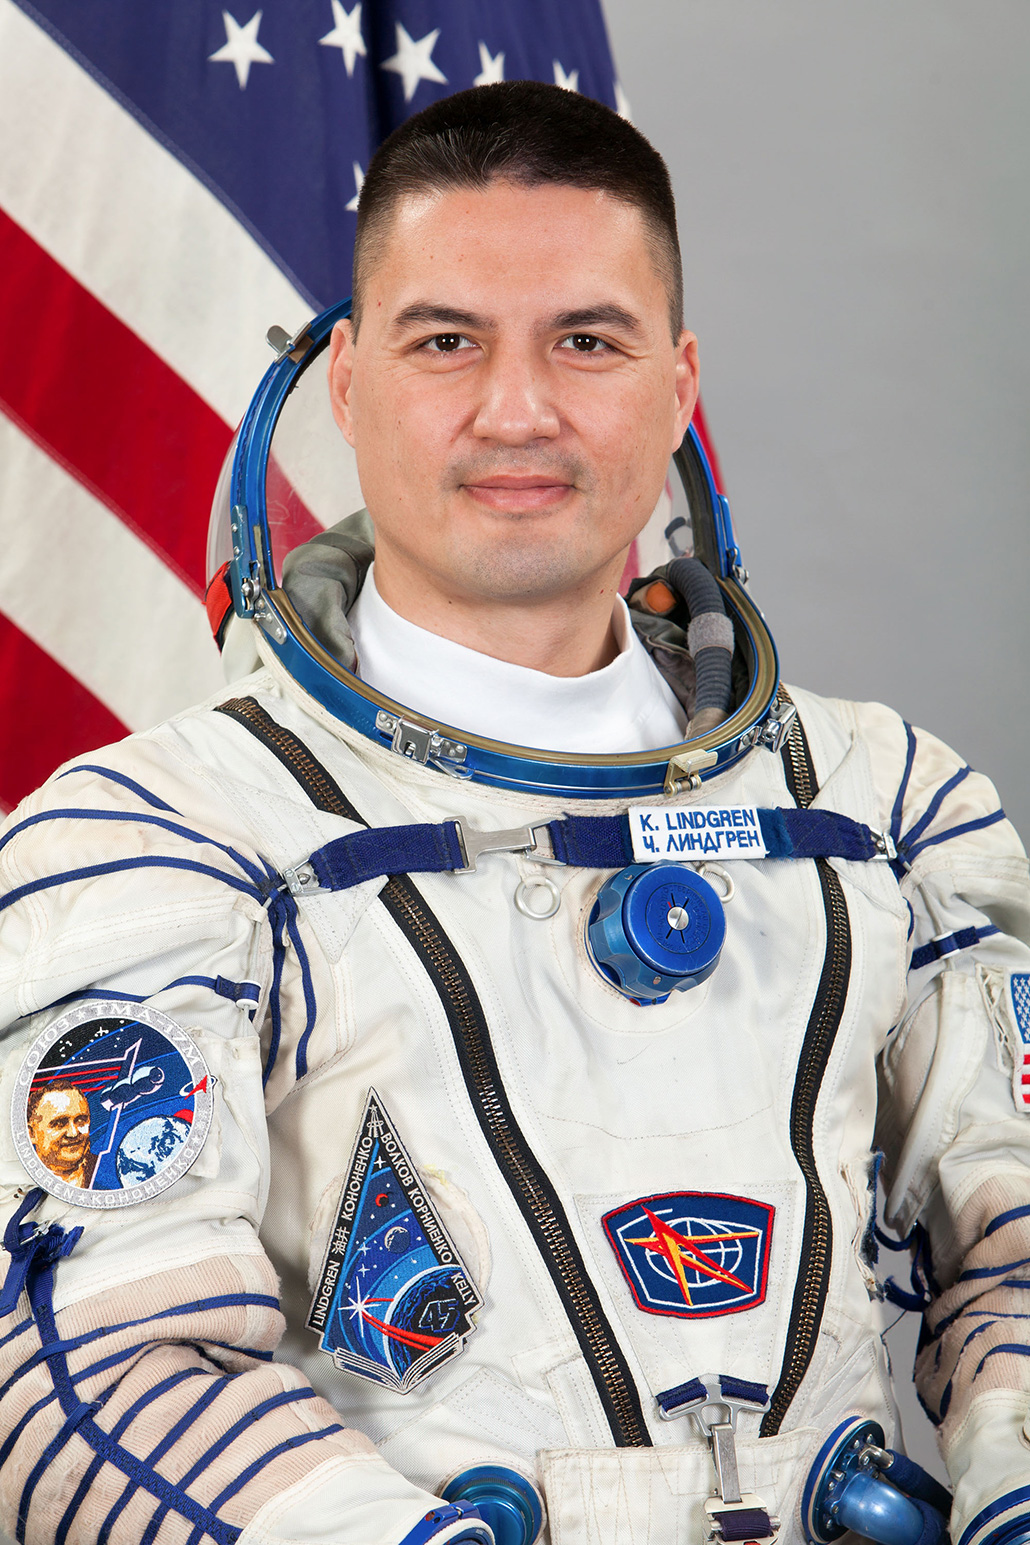 a formal photo of a white male astronaut wearing his spacesuit in front of an American flag